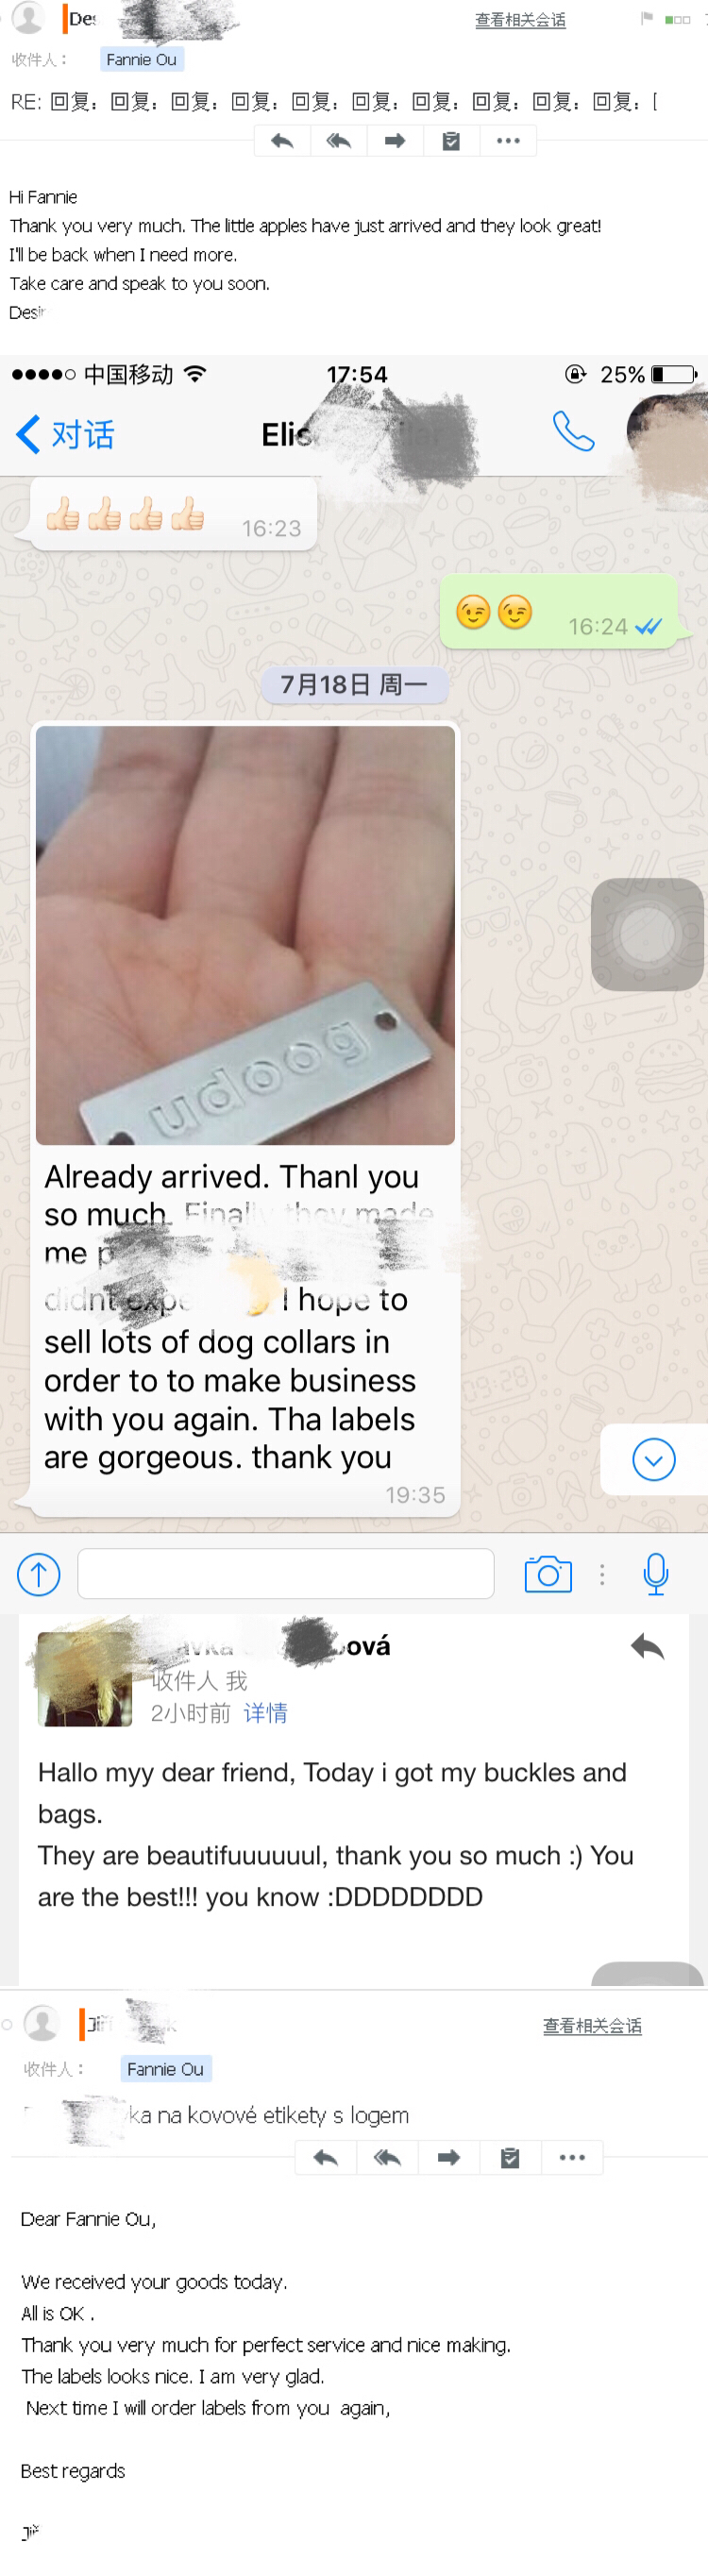 Product Feedback from our customers